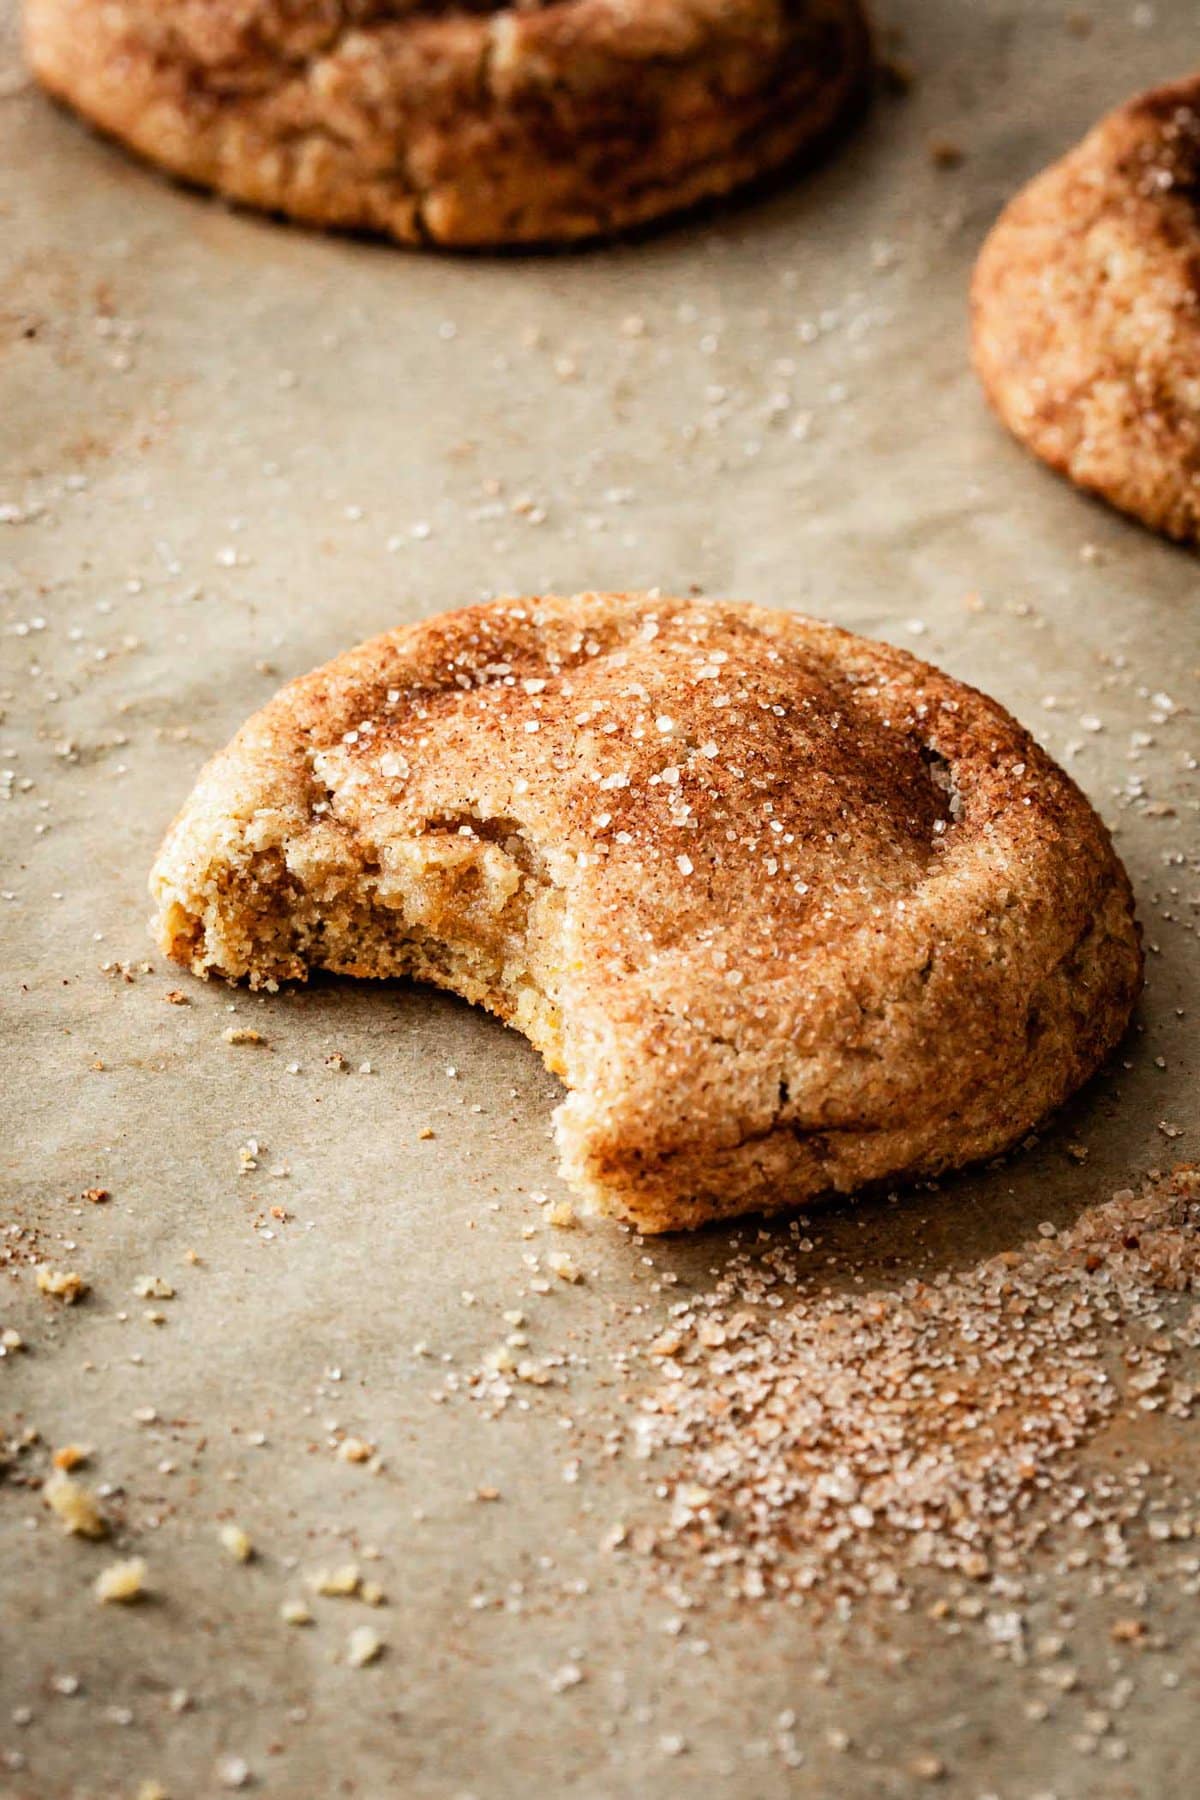 side view of a gluten-free snickerdoodle with a bite taken out revealing a gooey middle